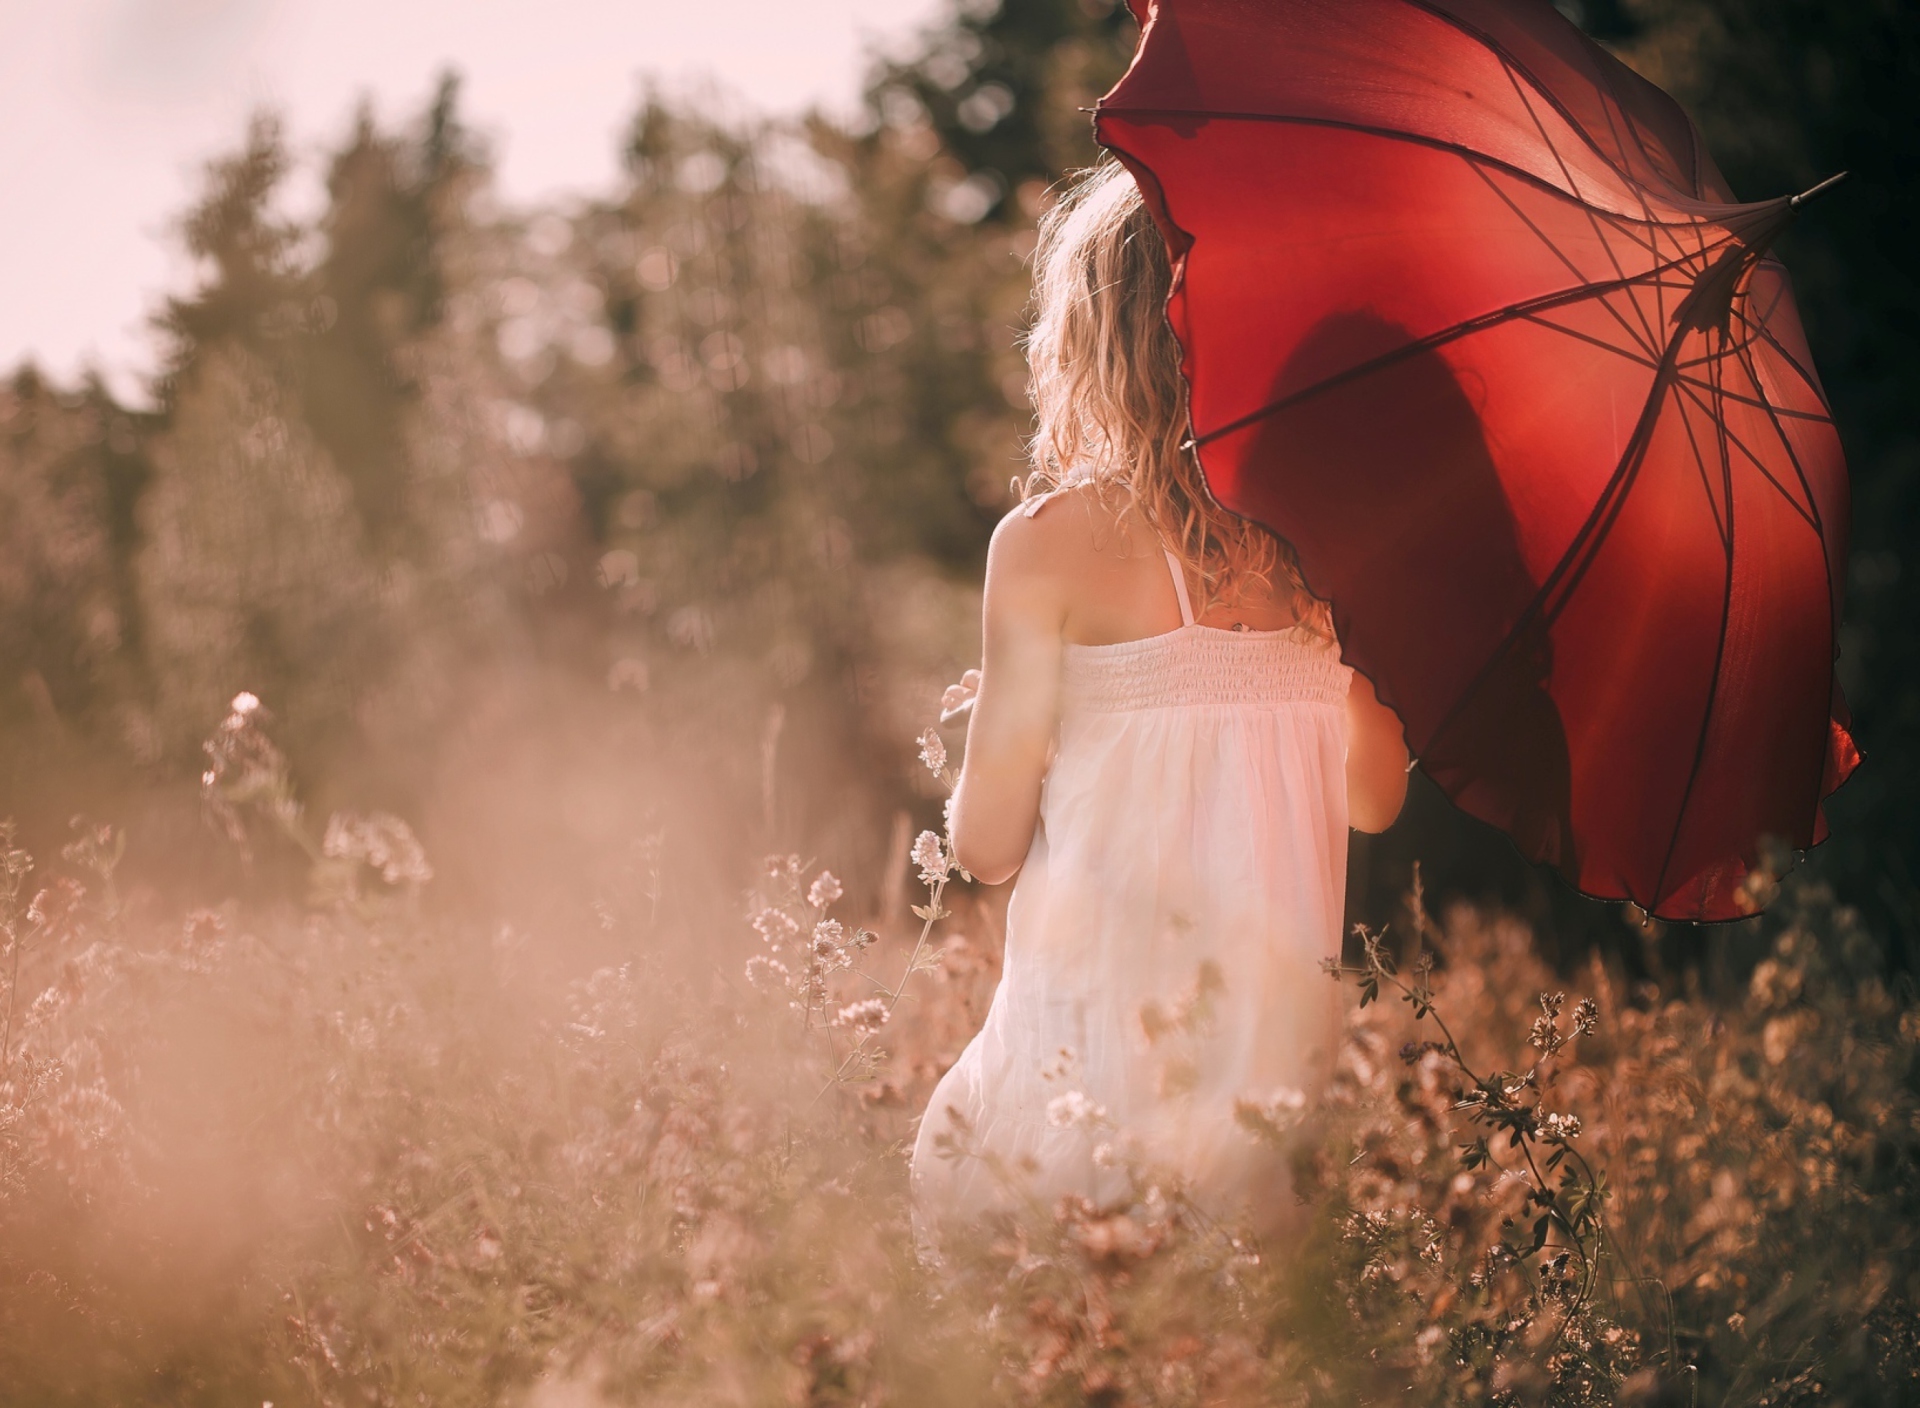 Girl With Red Umbrella wallpaper 1920x1408